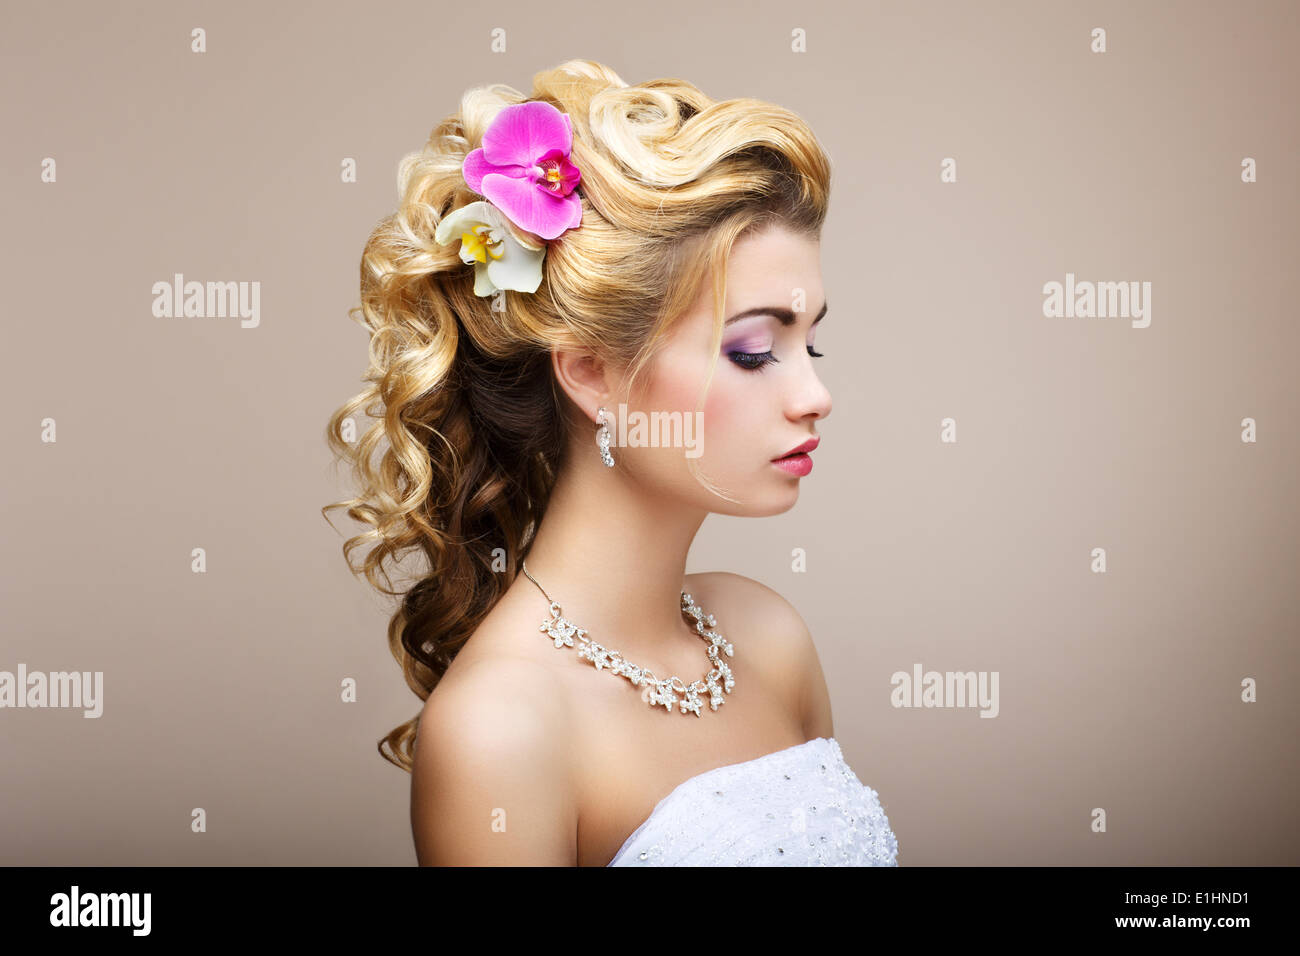 Harmony. Pleasure. Profile of Young Lady with Jewelry - Earrings & Necklace Stock Photo